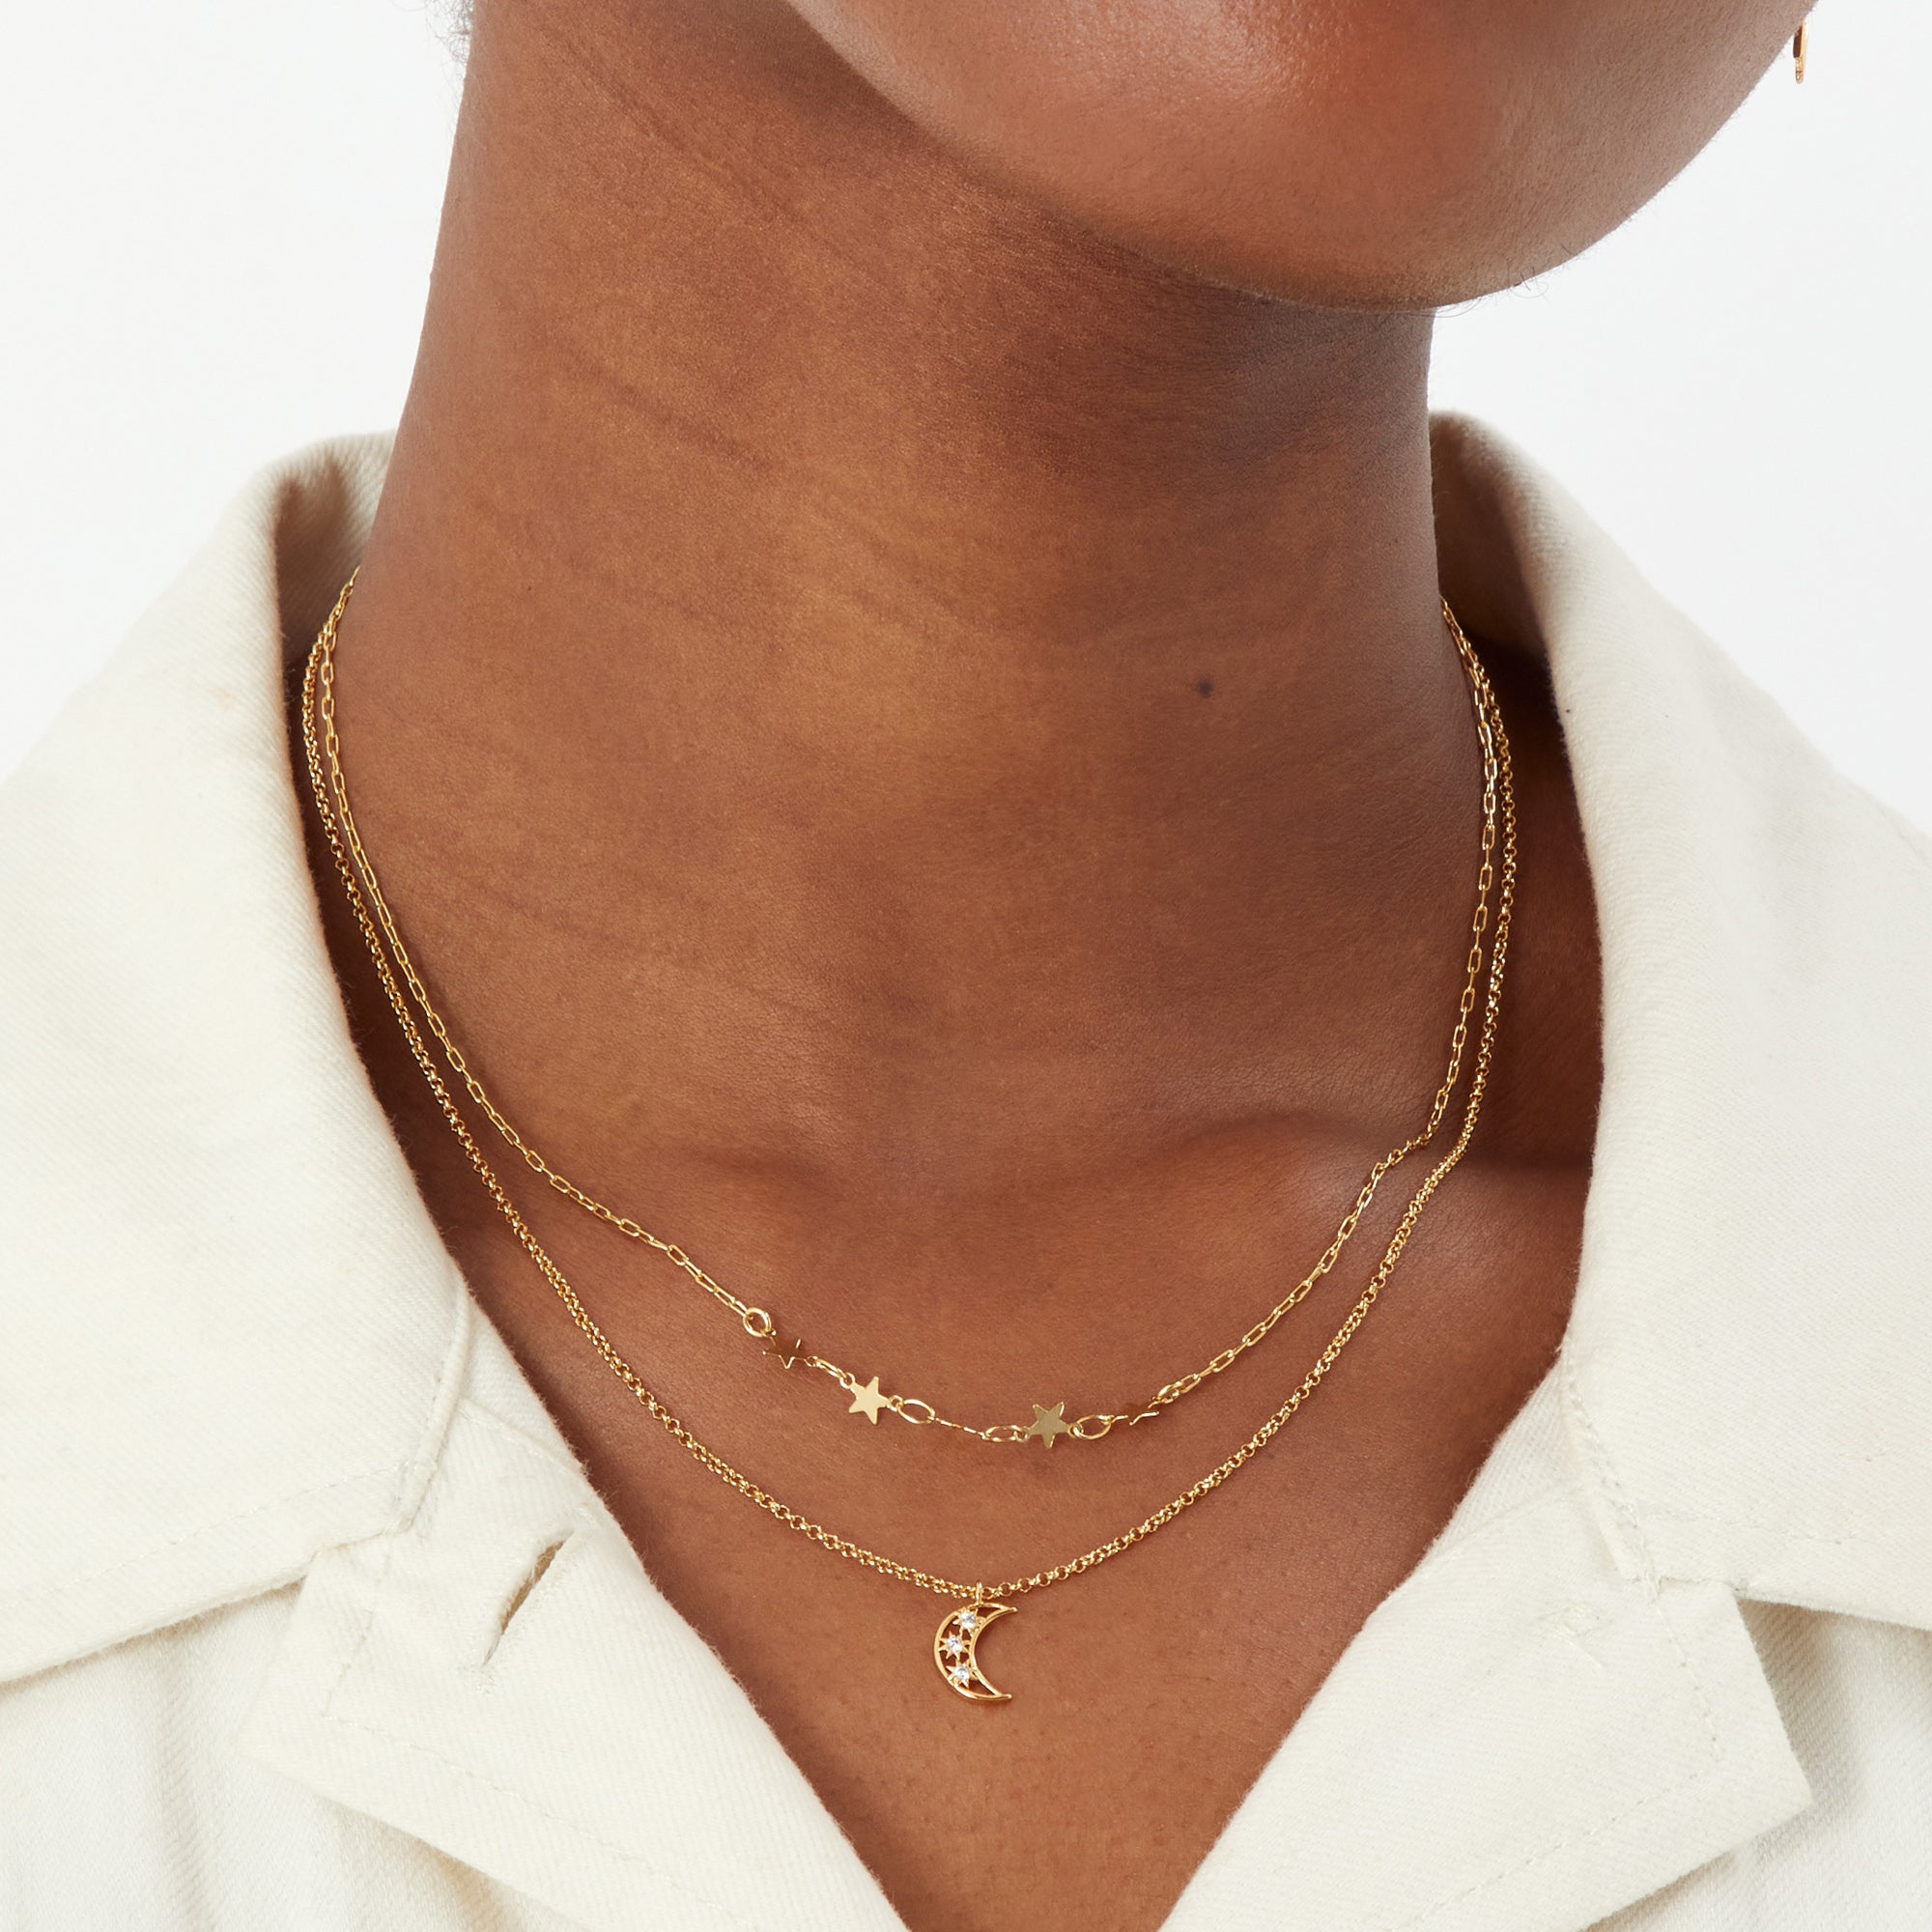 Real Gold Plated Celestial Layered Neclace For Women By Accessorize London